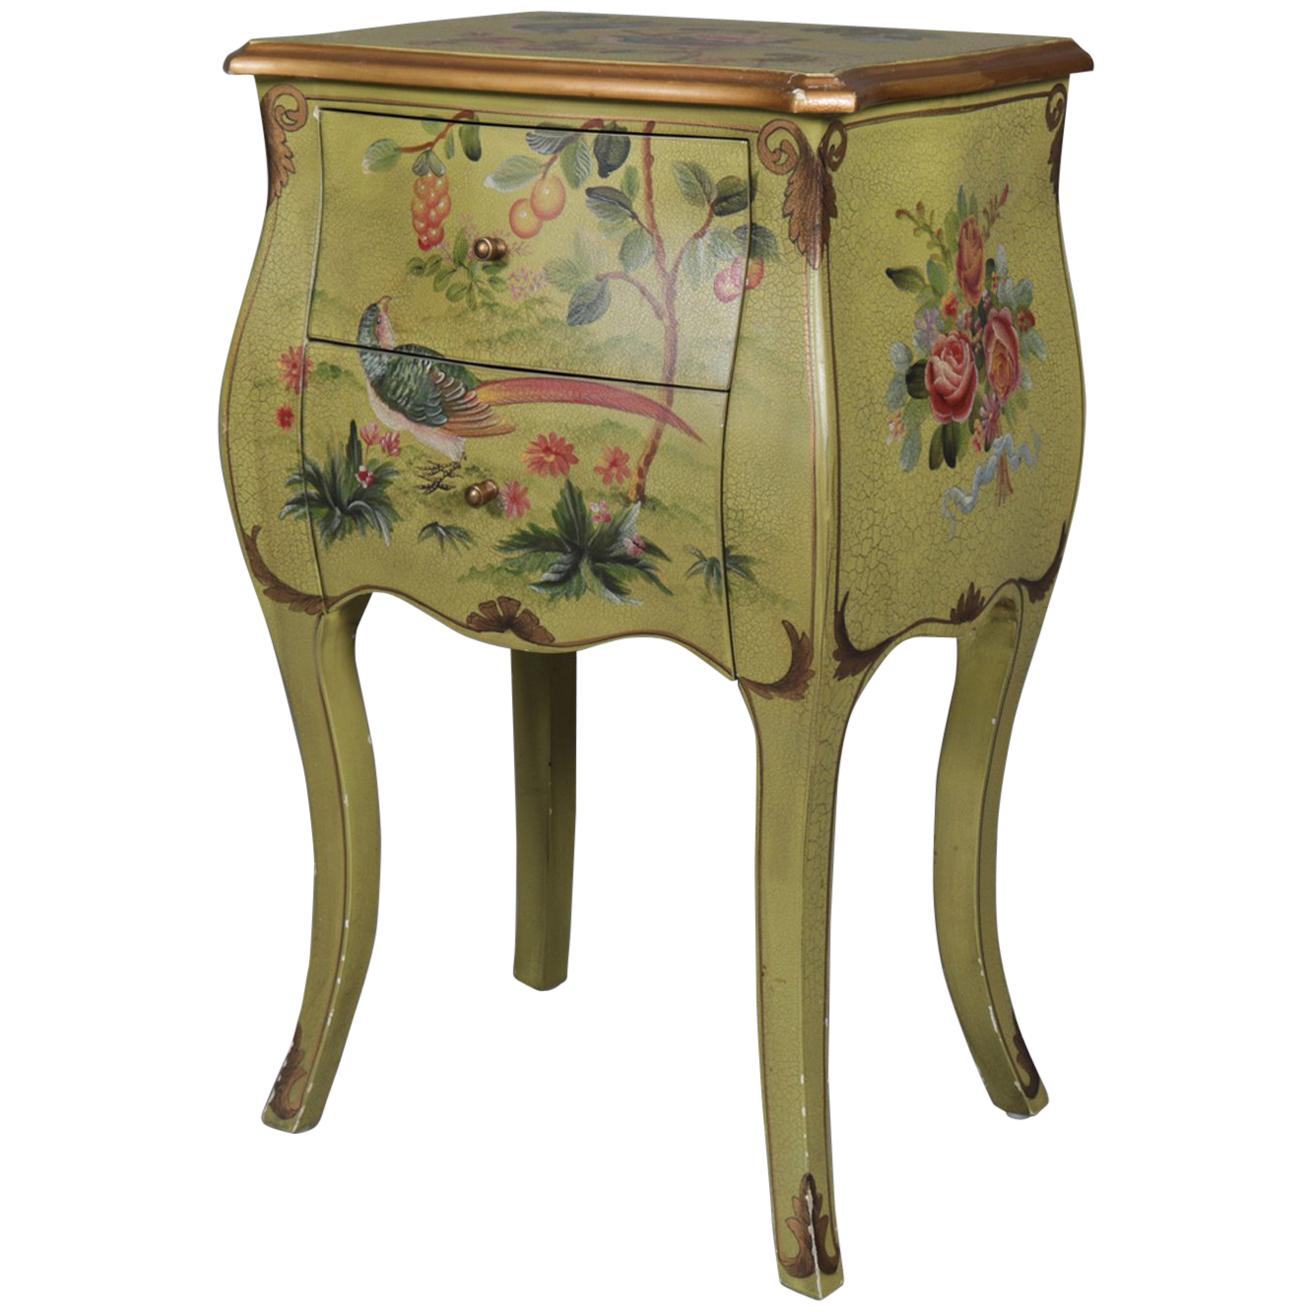 French Provincial Floral Painted and Gilt Bombe Stand with Roses and Pheasant